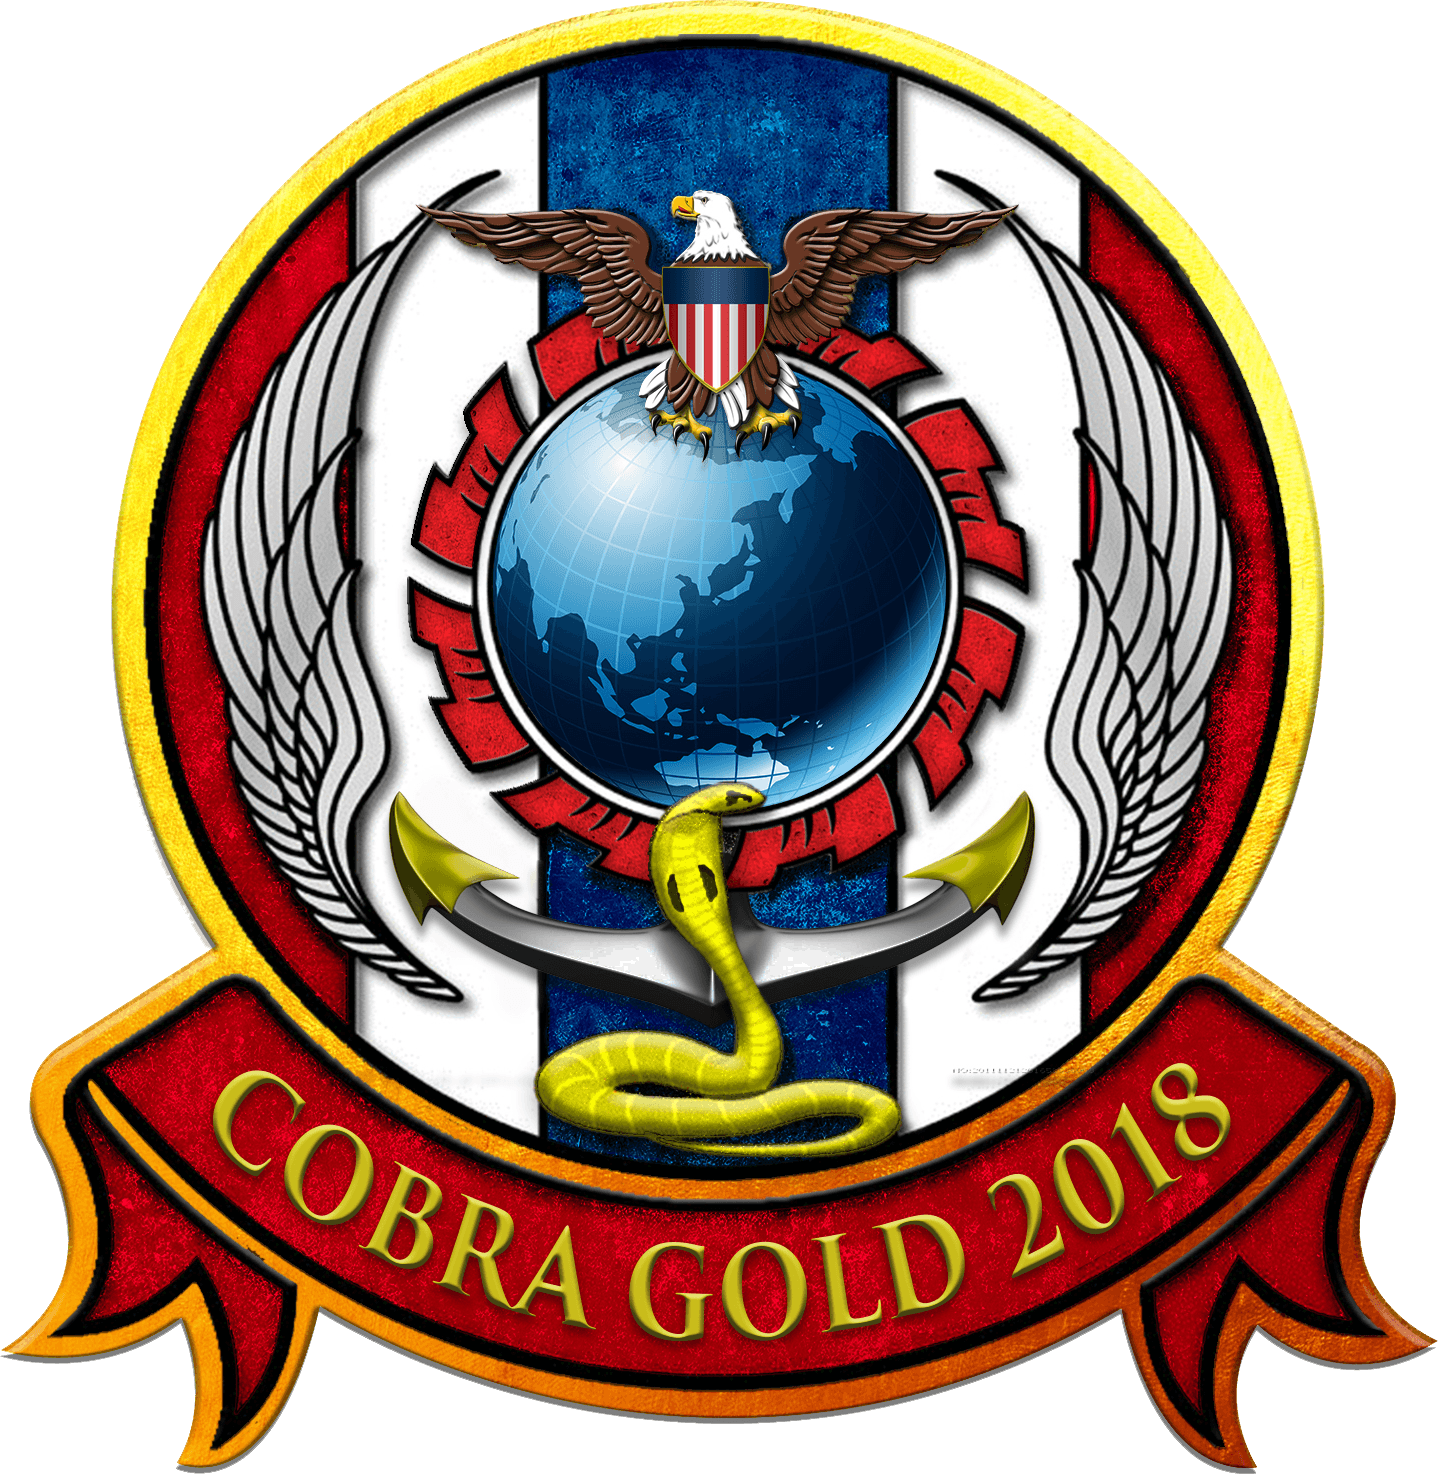 Gold and Red M Logo - Exercise Cobra Gold 2018 Insignia (180123 M JU566 001).png